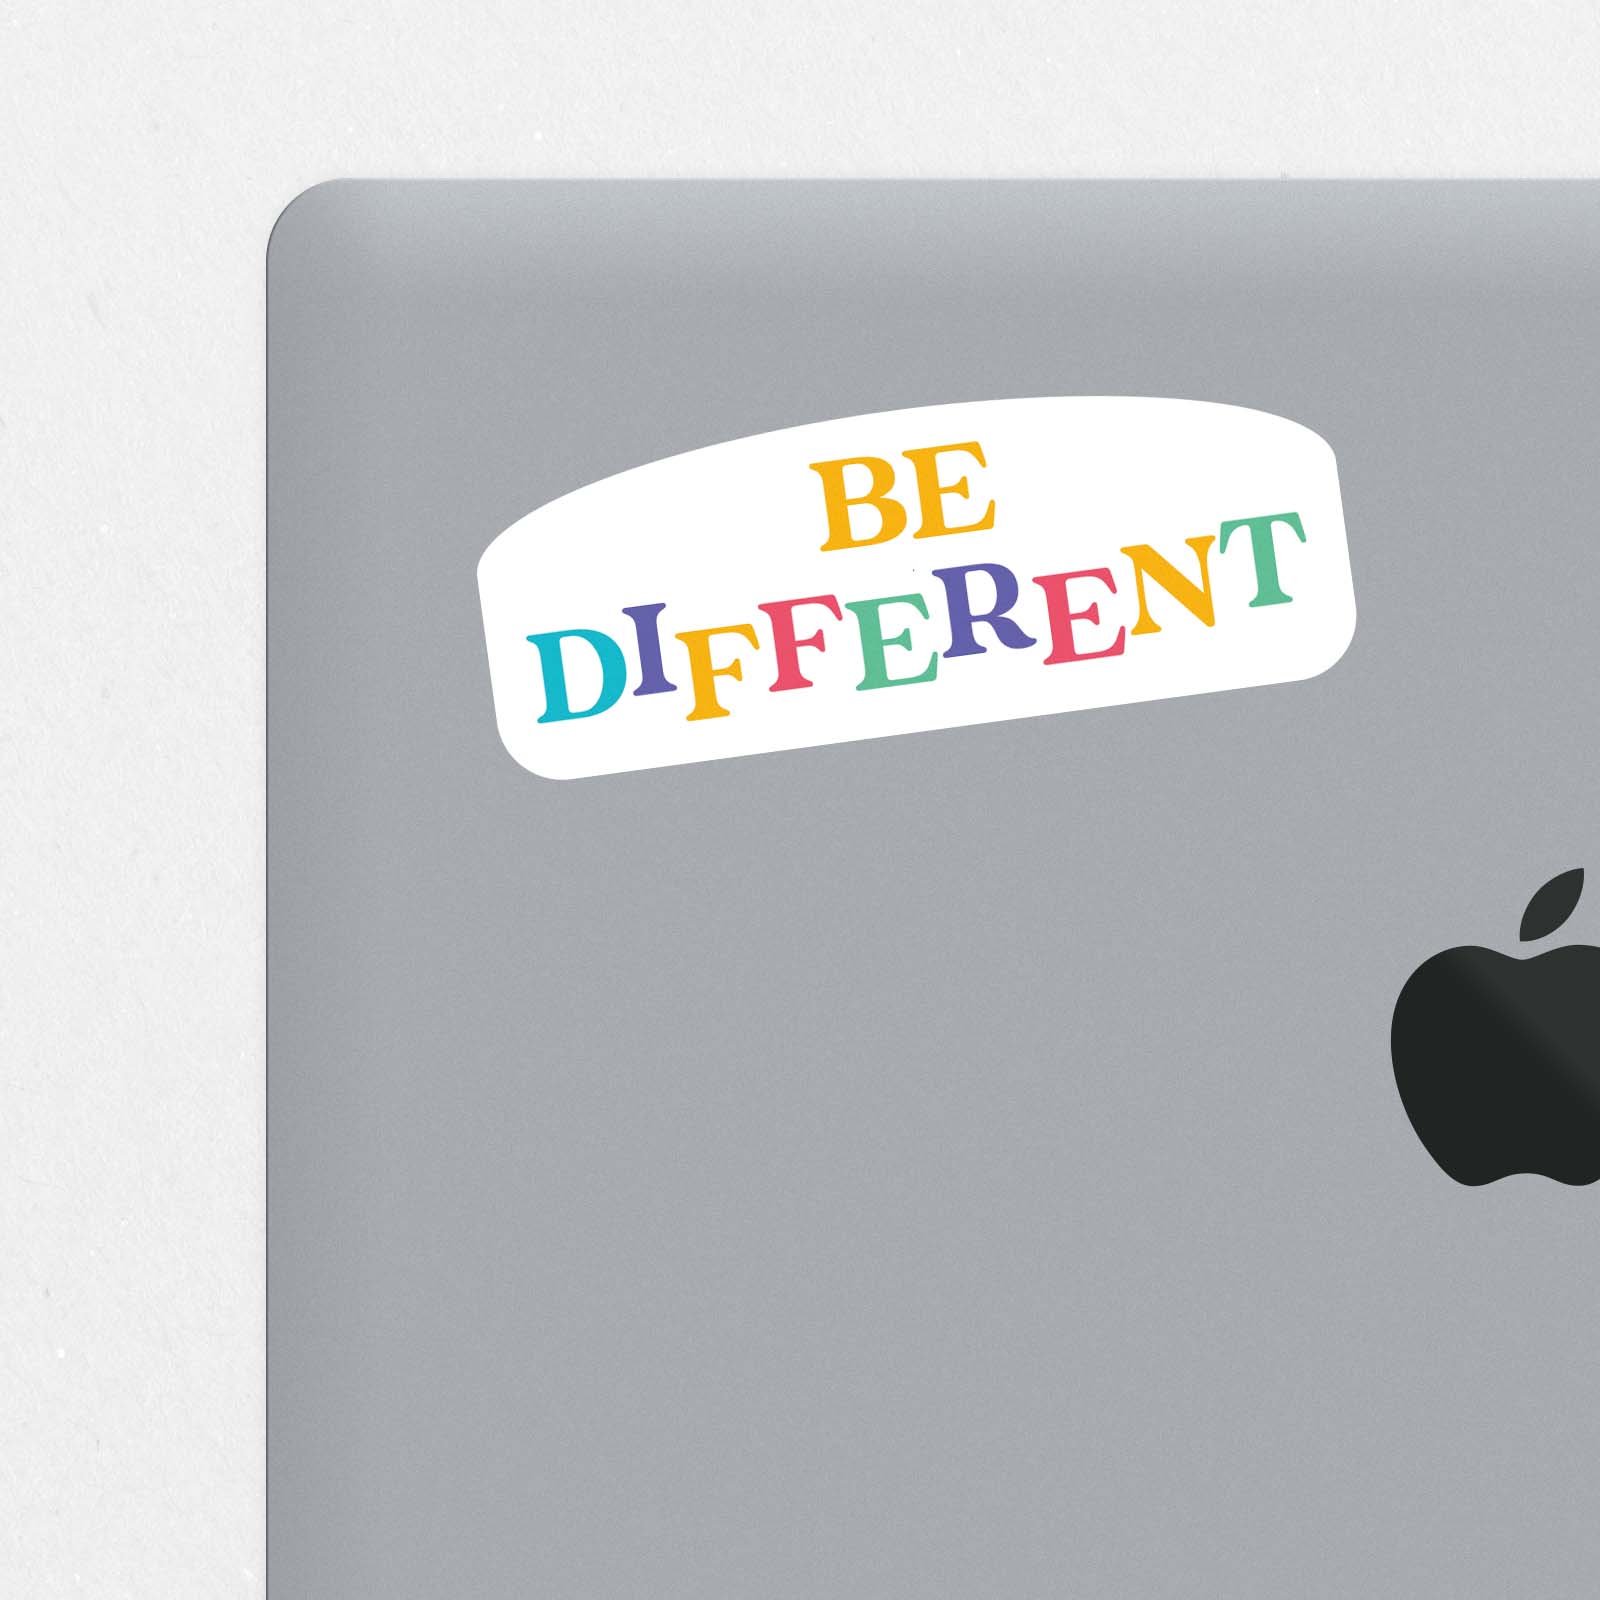 x2 Be Different Printed Stickers